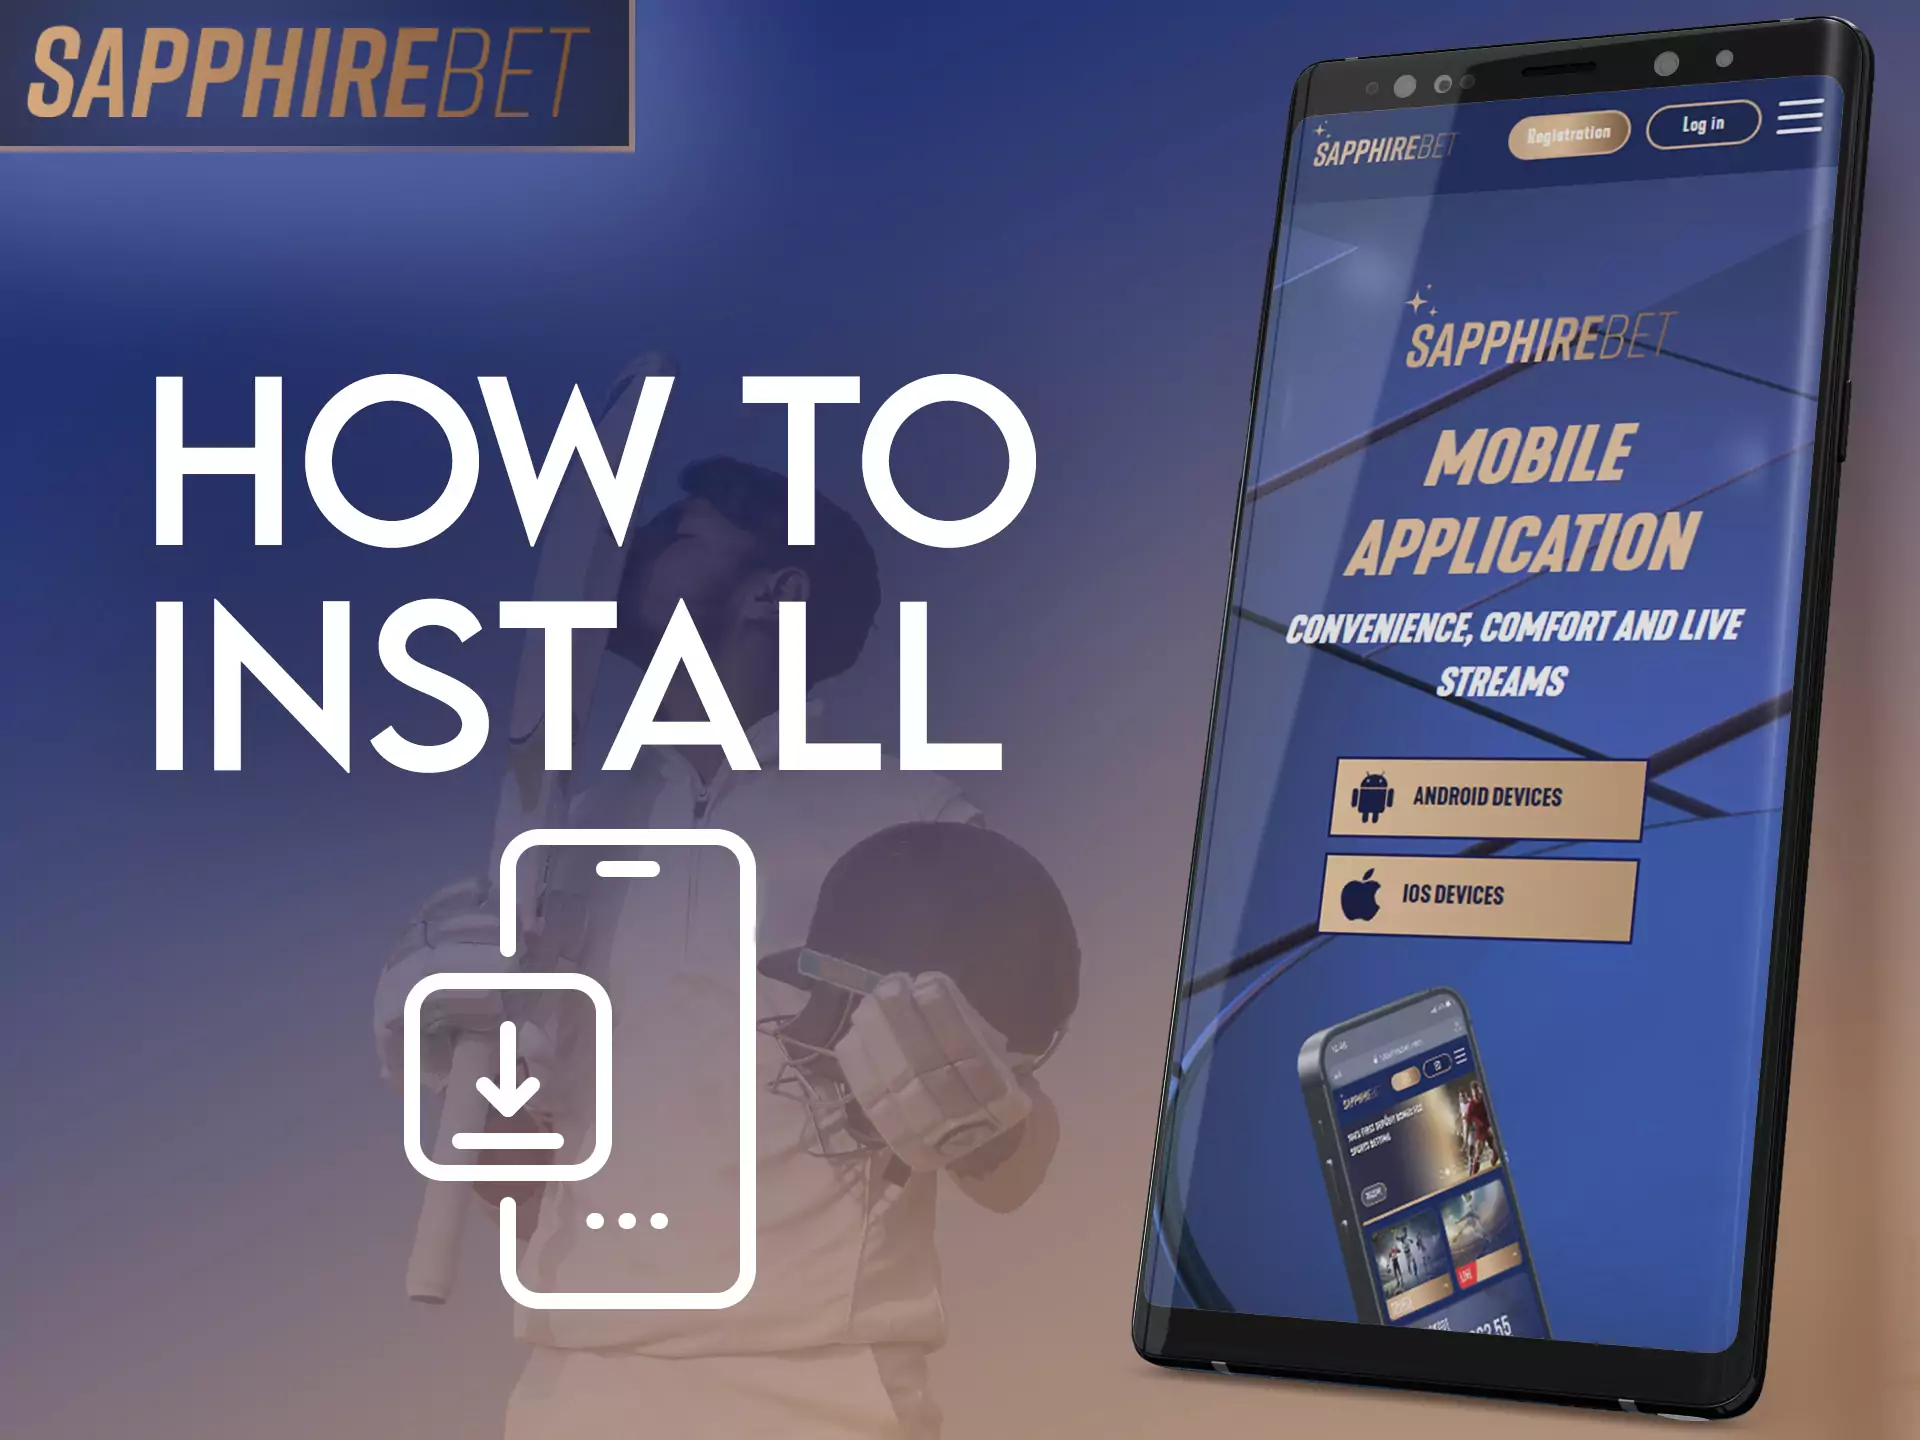 With this instruction, install the Sapphirebet app on your mobile device.